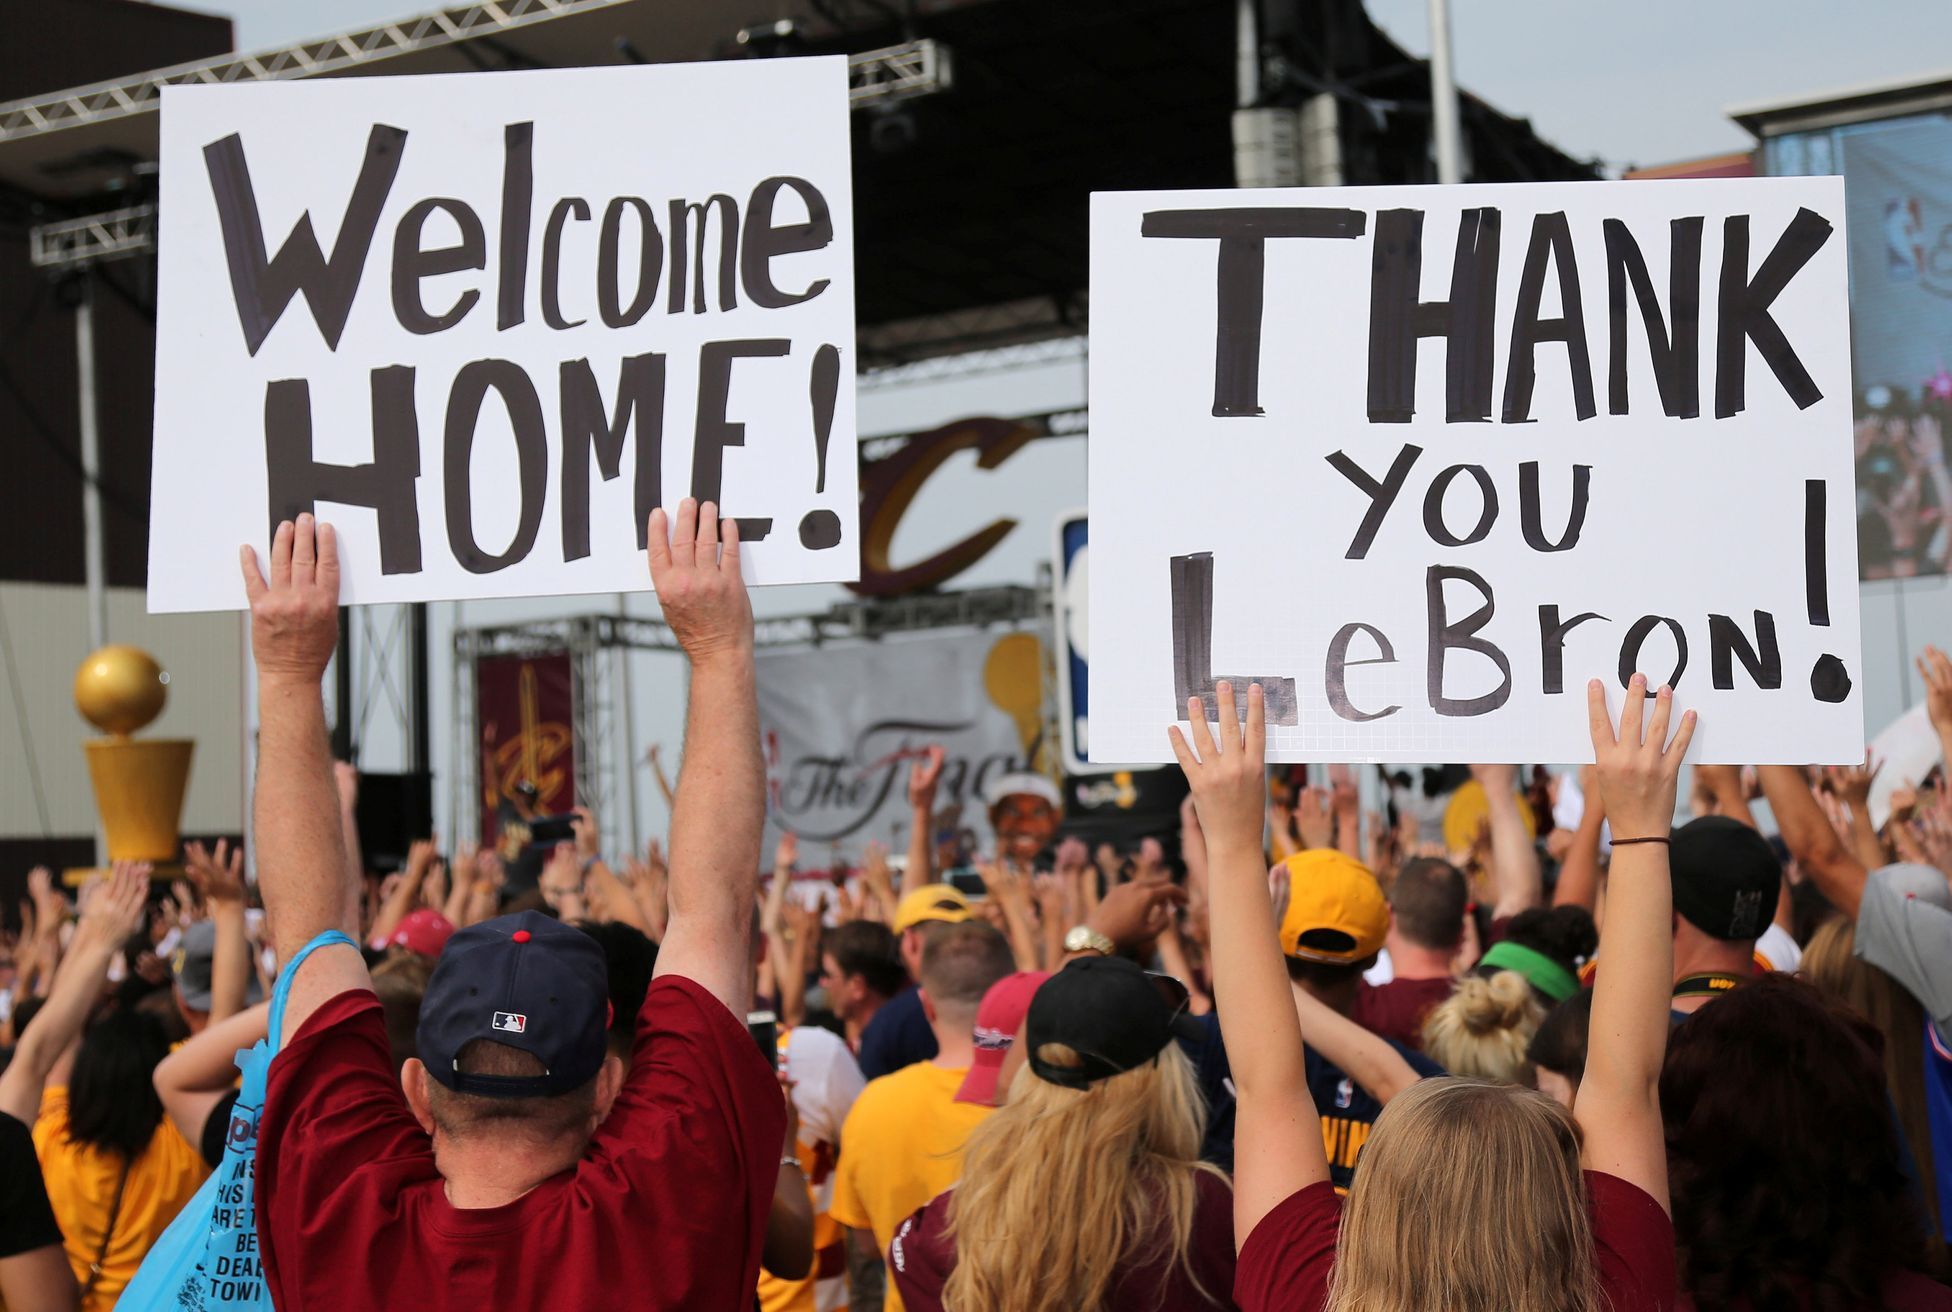 Cleveland Cavaliers fans celebrate and show their appreciation for LeBron James at a welcome party held at the airport in Cleveland